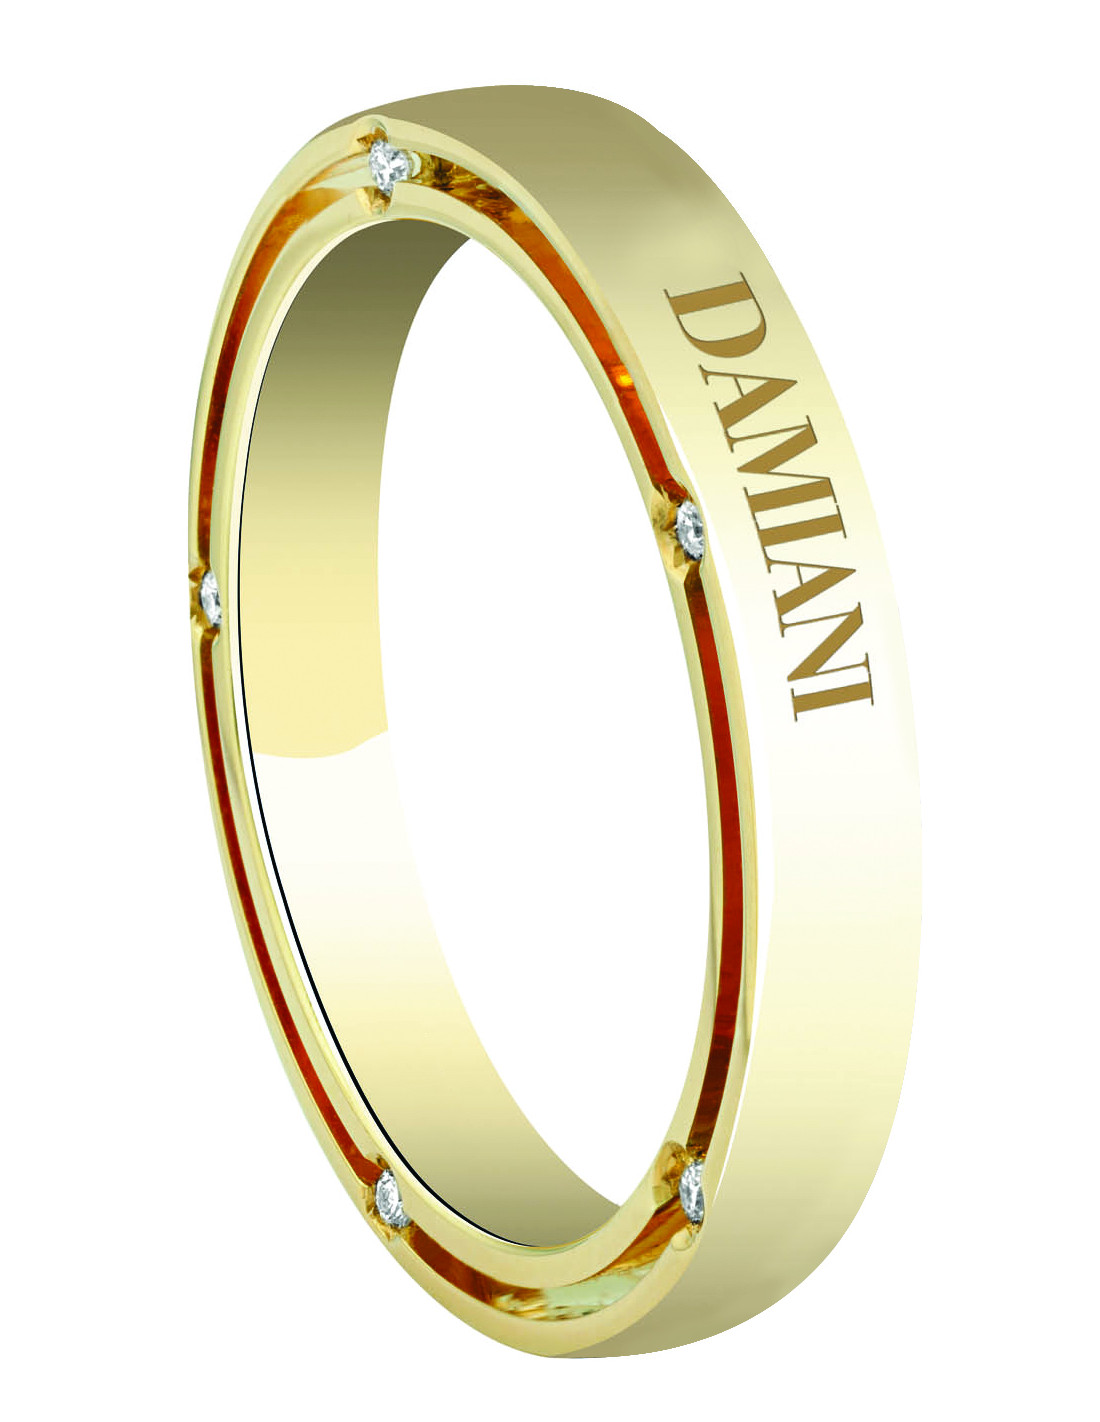 DAMIANI D-SIDE WEDDING BANDS YELLOW GOLD and DIAMONDS 5+5 Thickness of